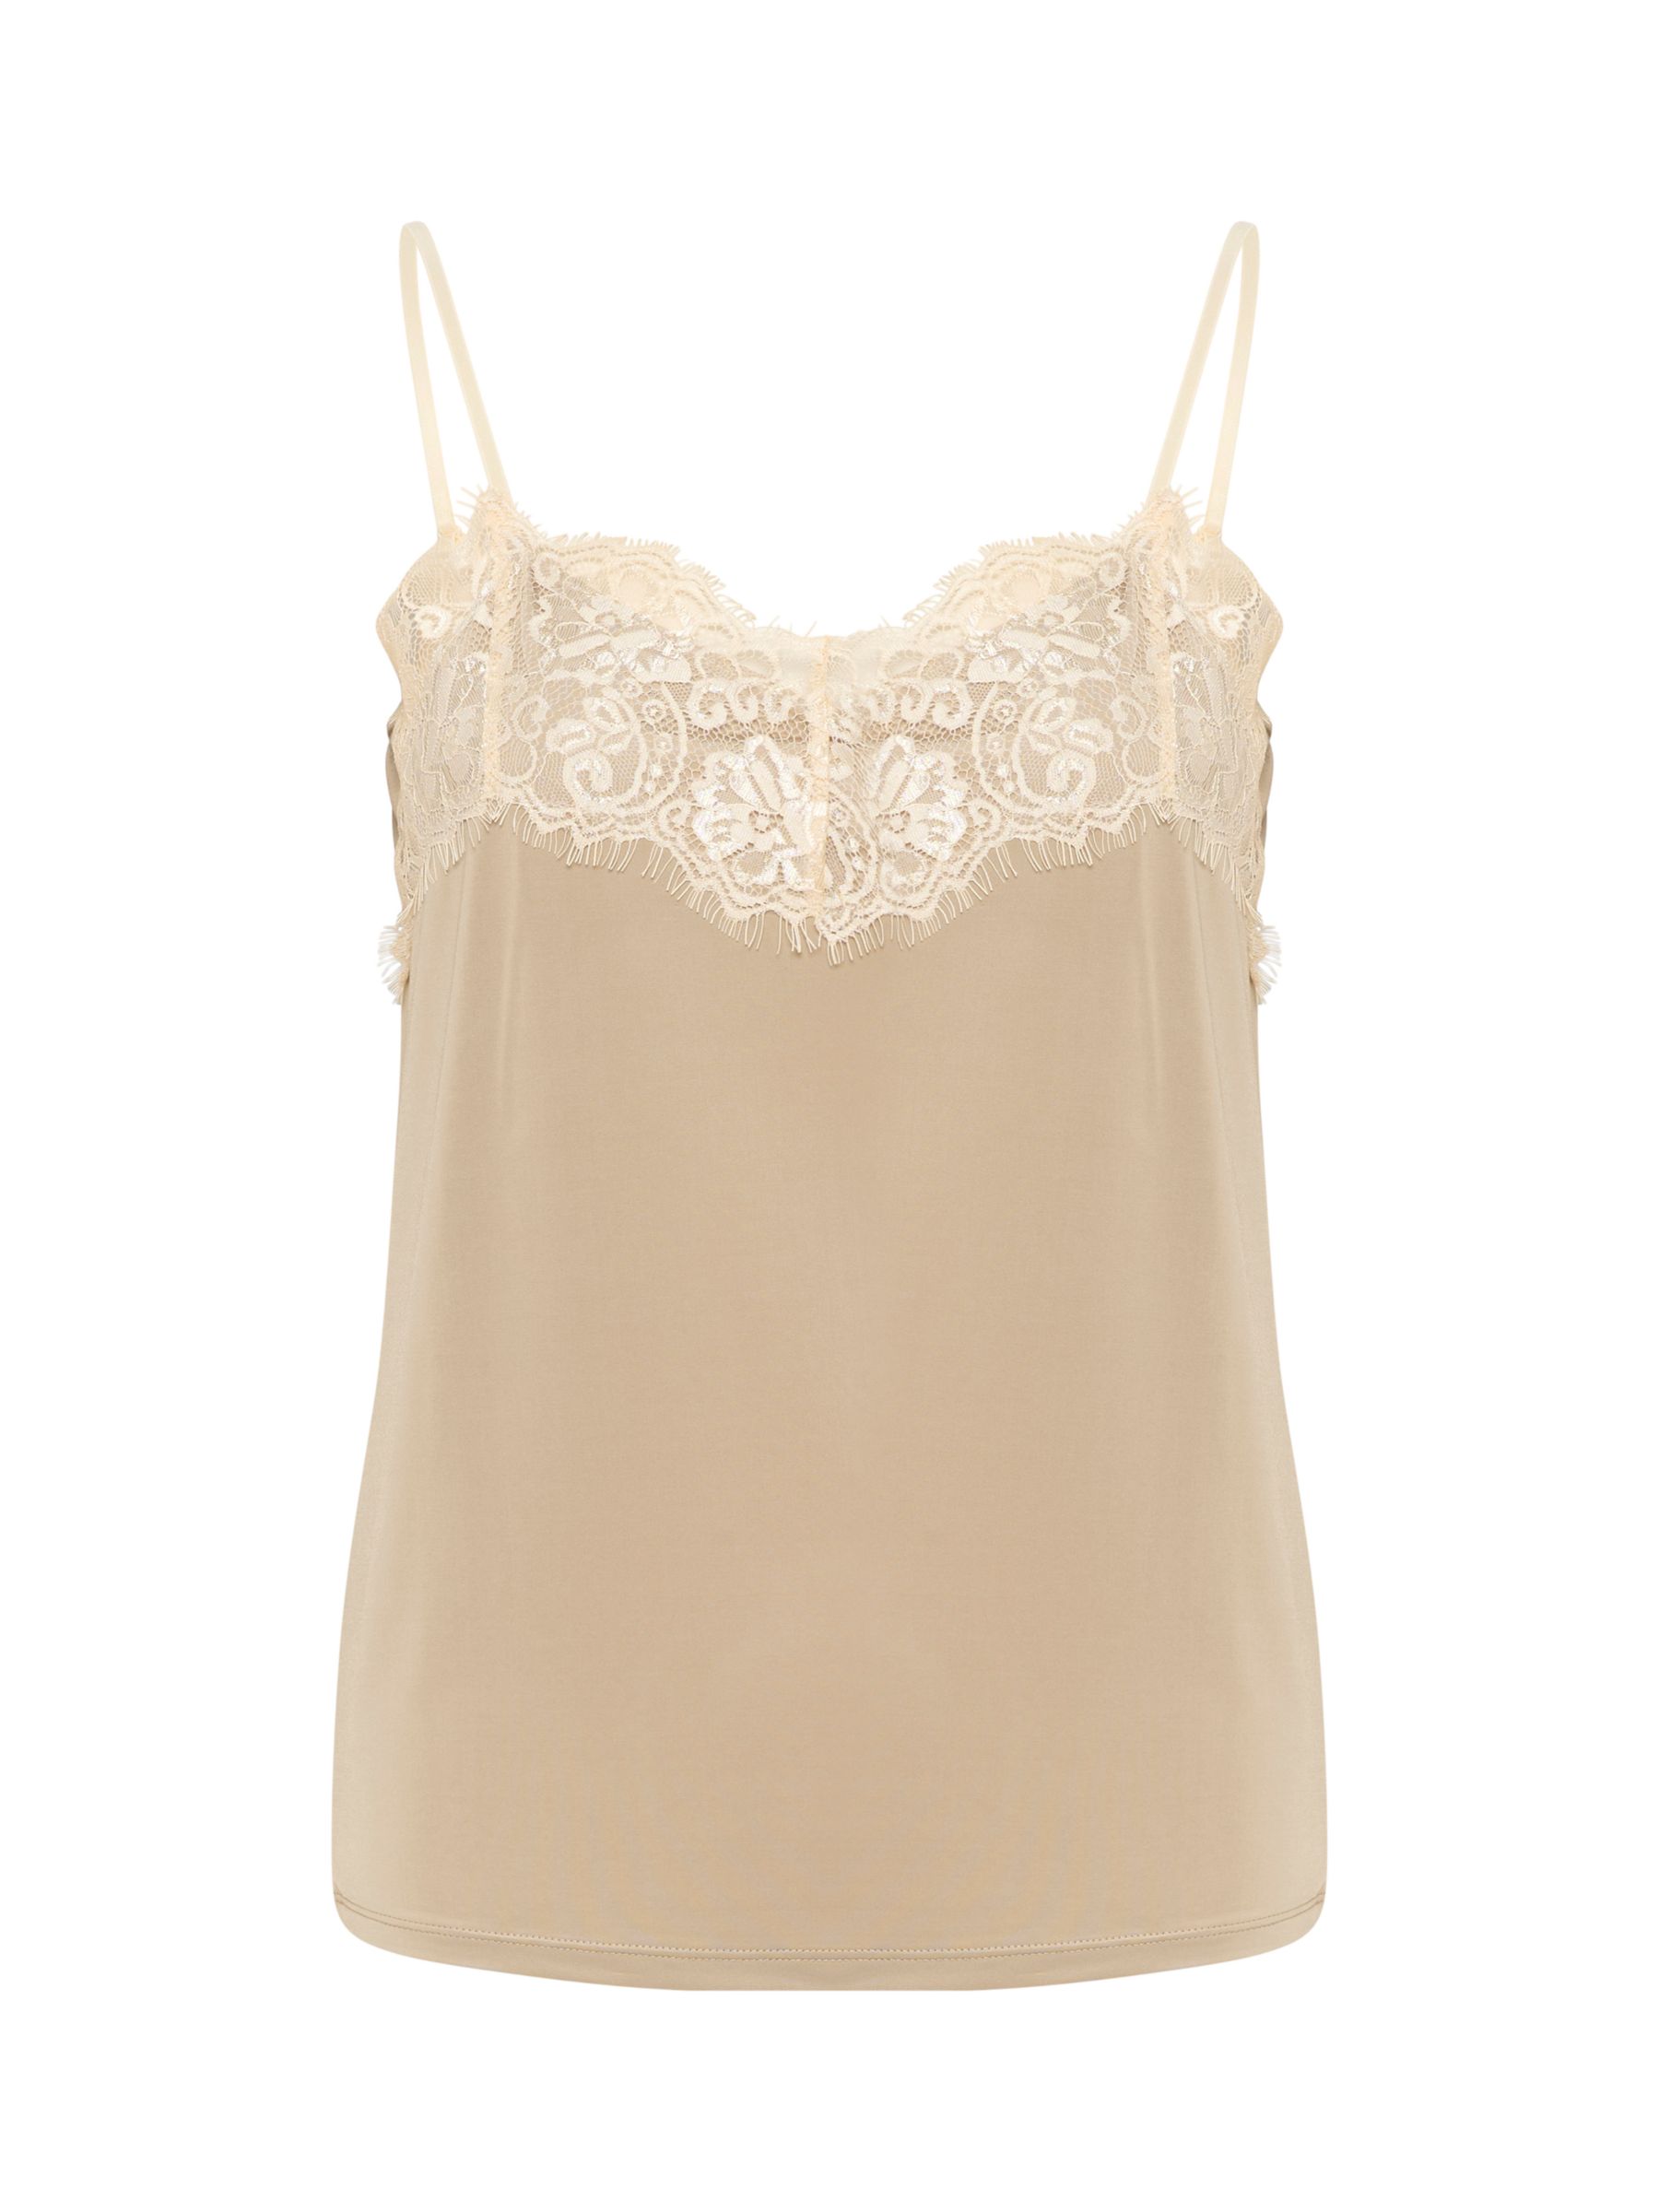 Buy Soaked In Luxury Cayla Lace V-Neck Singlet Top, Taupe Online at johnlewis.com